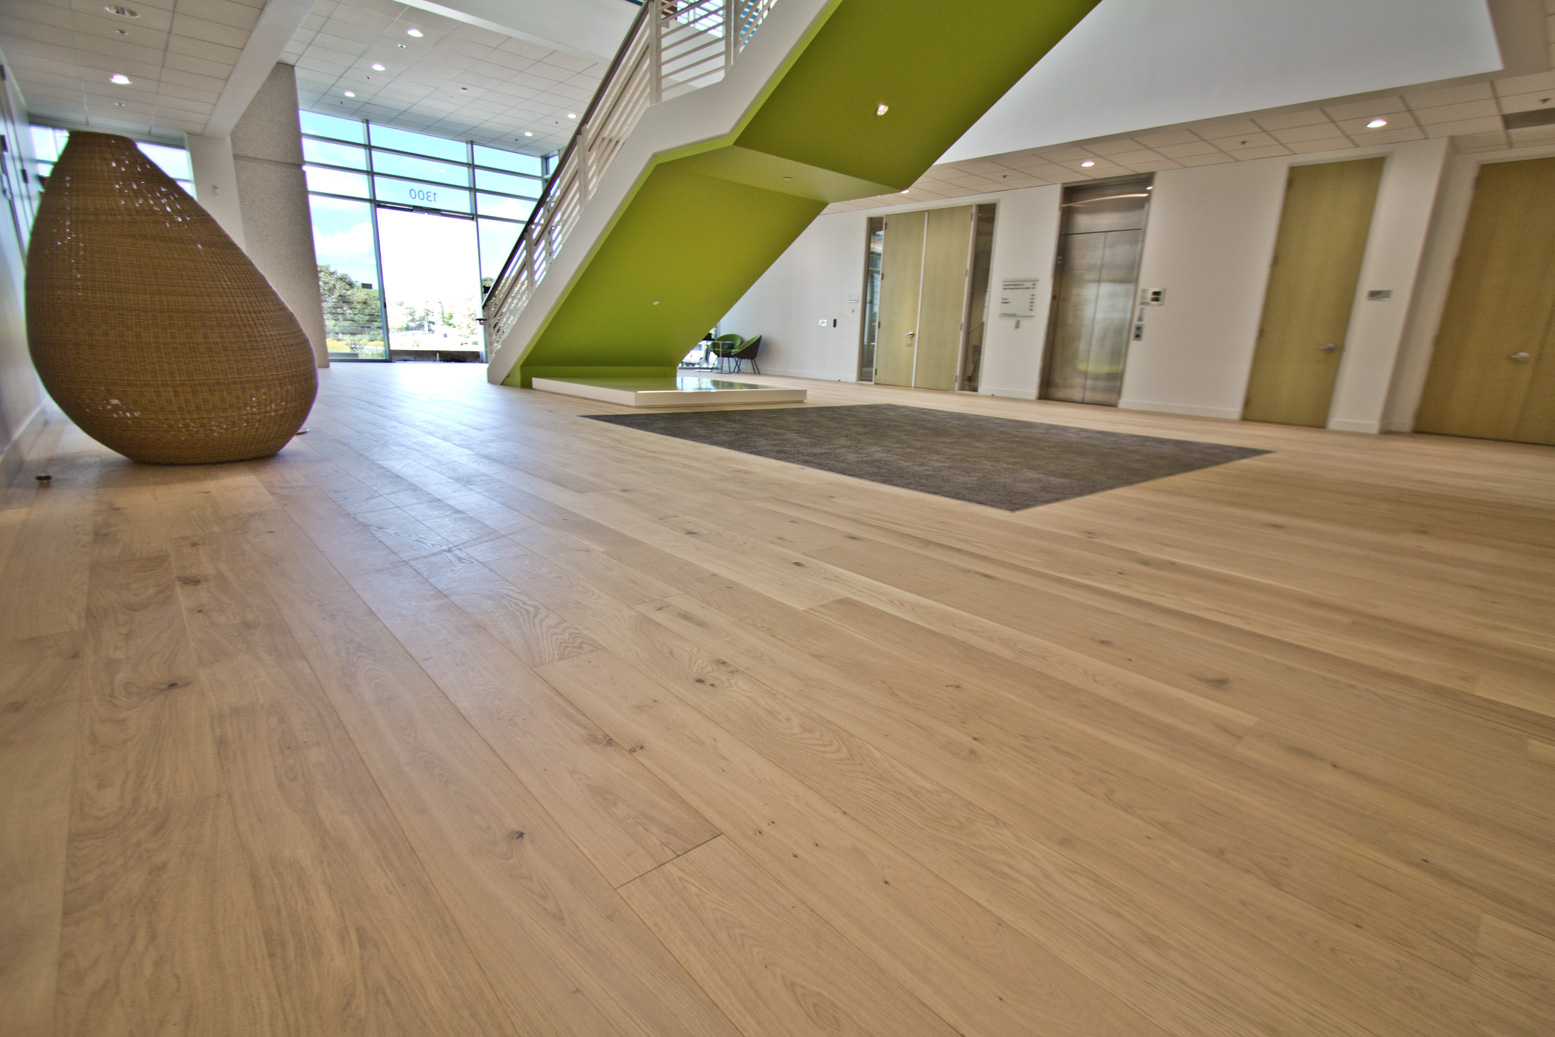 AMITY – euro white oak – original cut character grade – prefinished with hardwax oil, voids filled